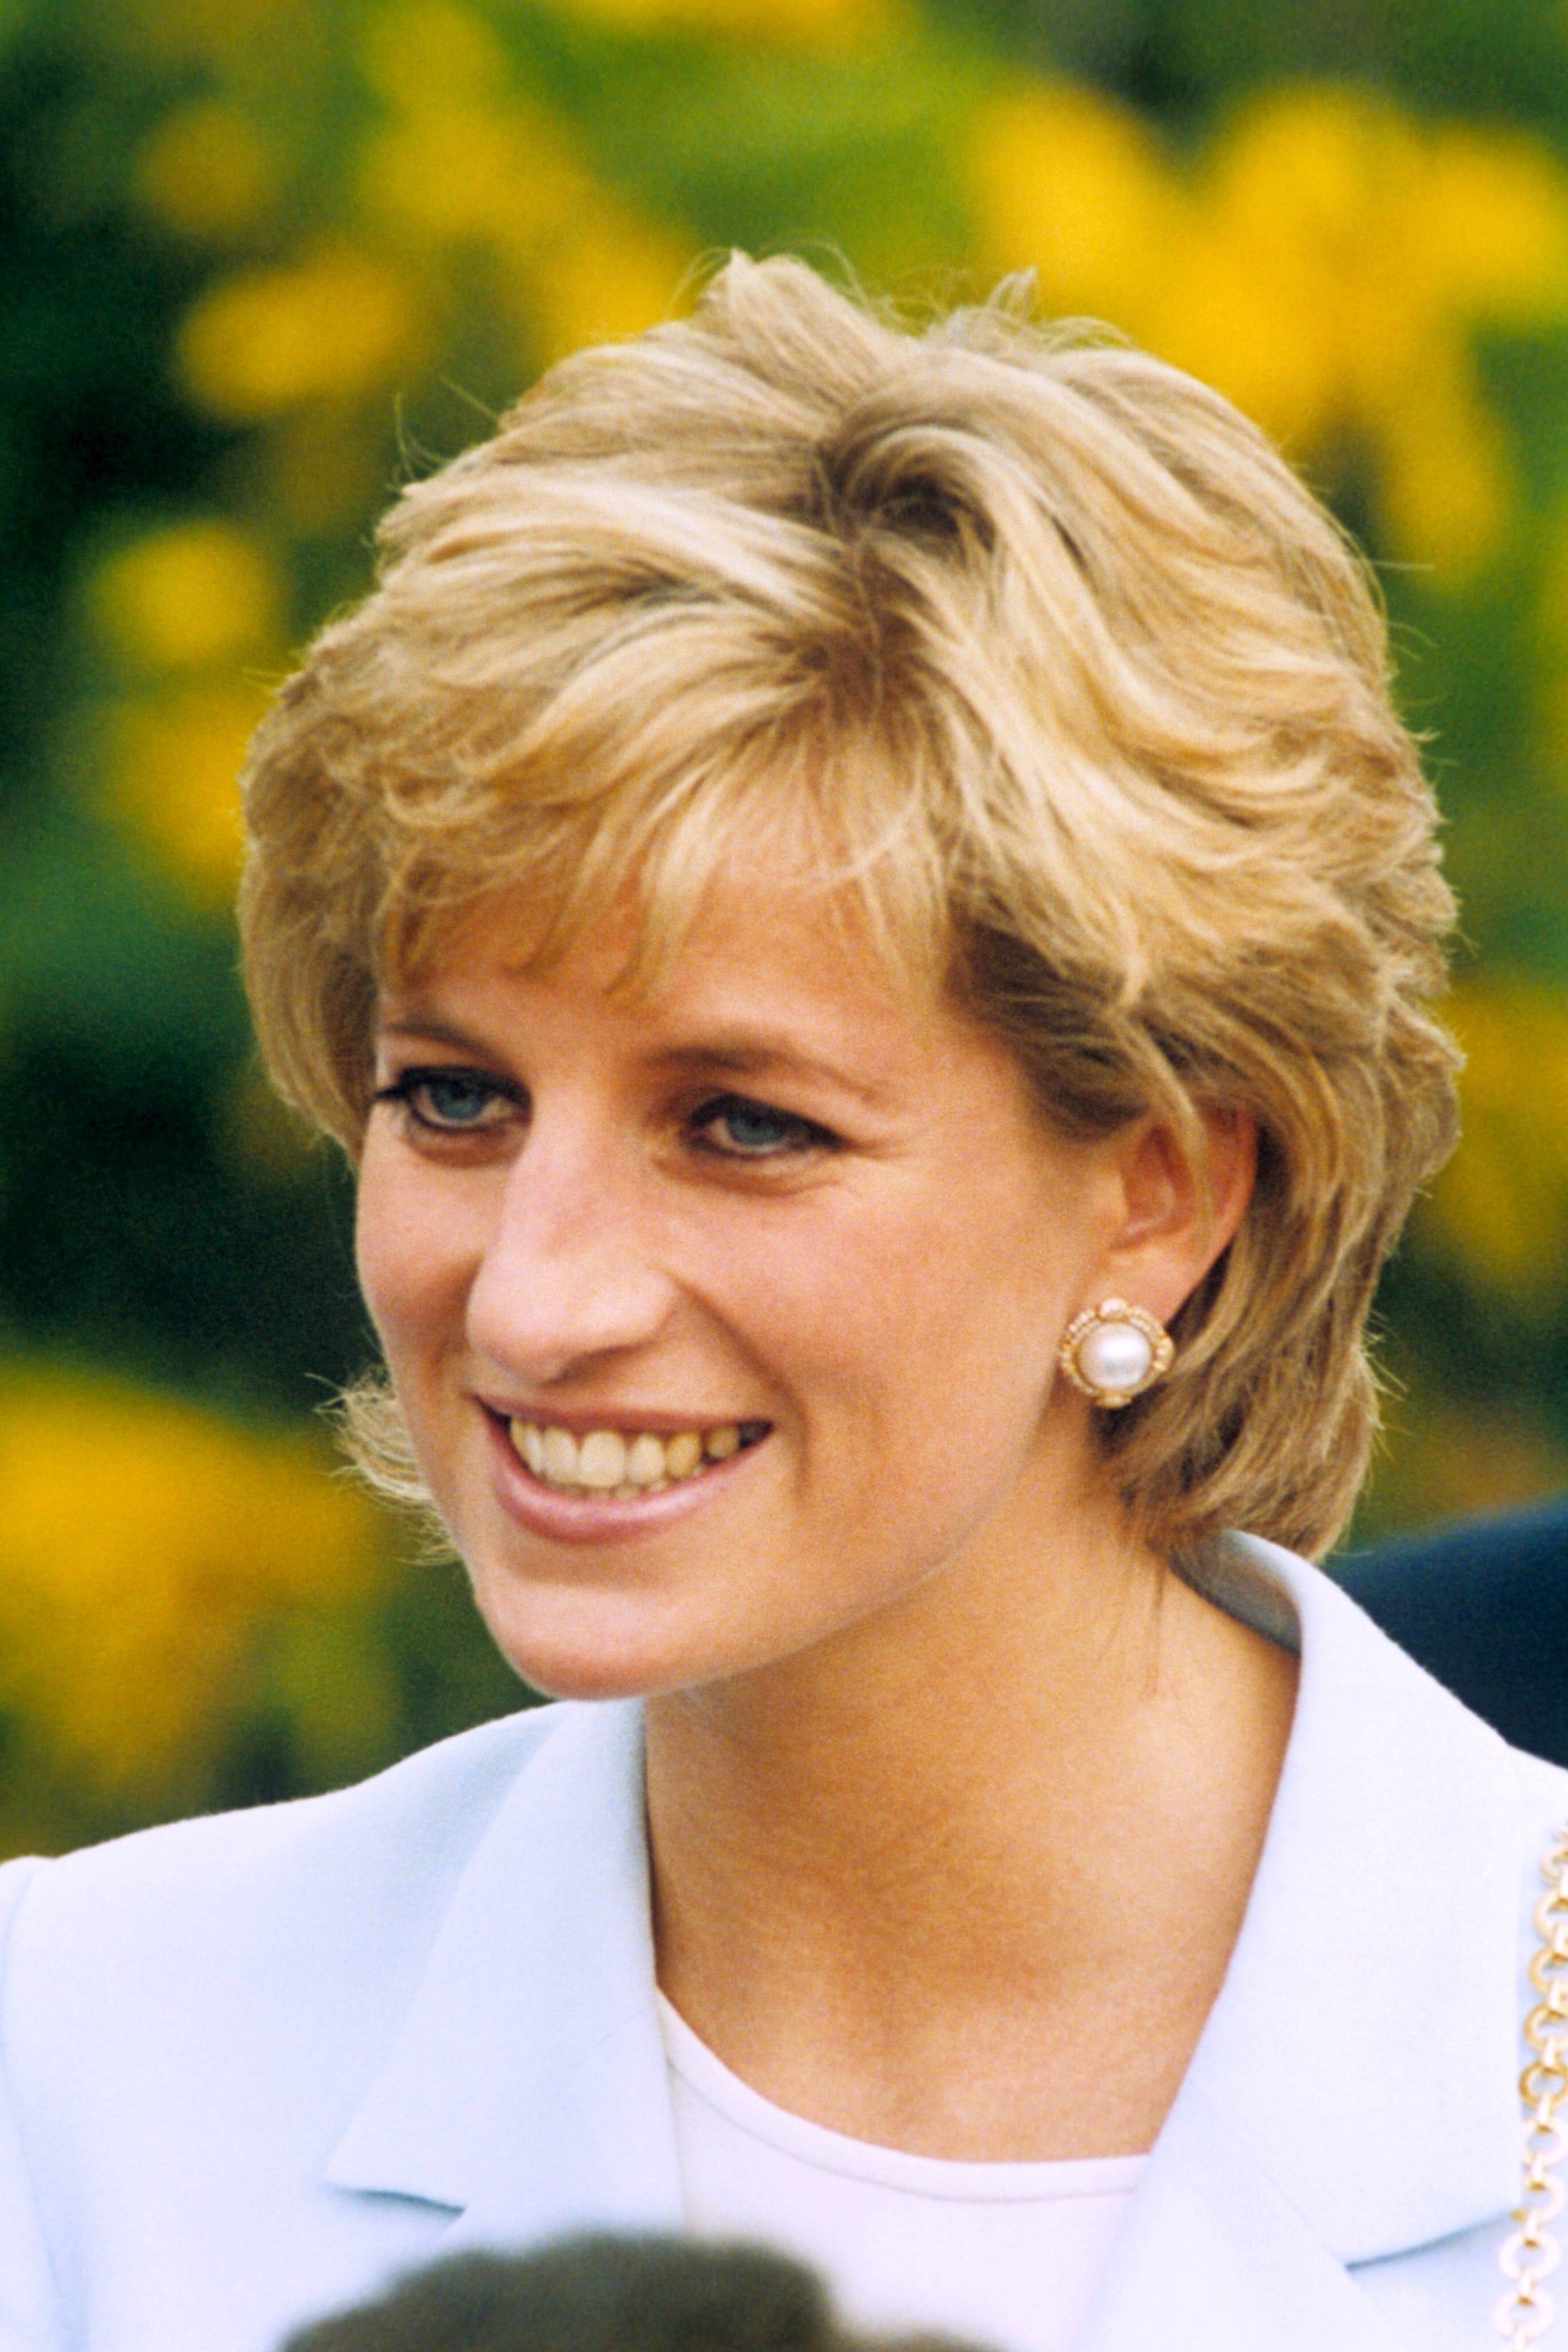 This Is the Real Story Behind Princess Diana's Iconic Haircut | Glamour